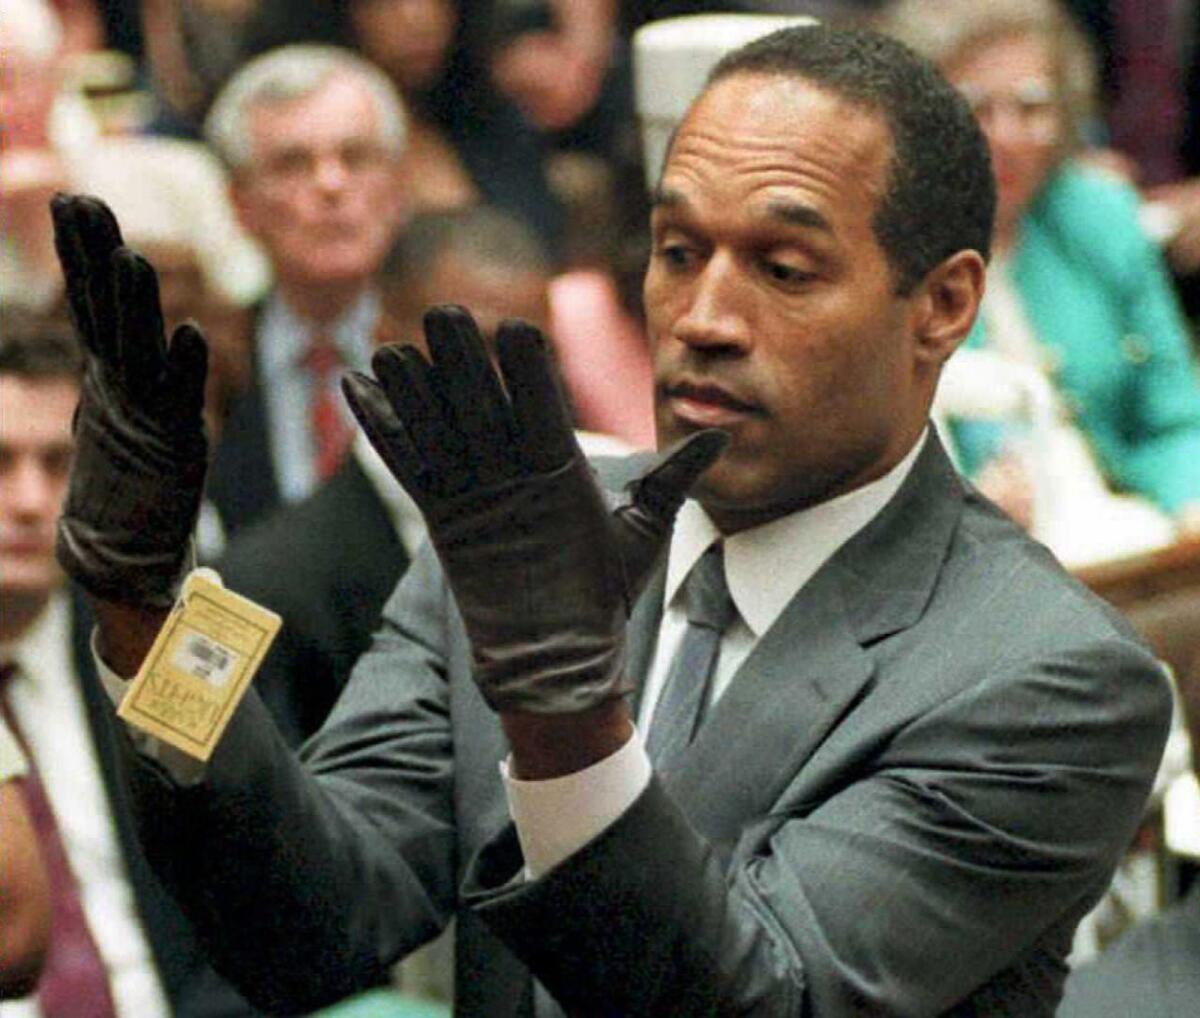 This Nov. 30, 1995, file photo shows former football player and actor O.J. Simpson looking at a new pair of Aris extra-large gloves that prosecutors had him put on during his double-murder trial in Los Angeles.